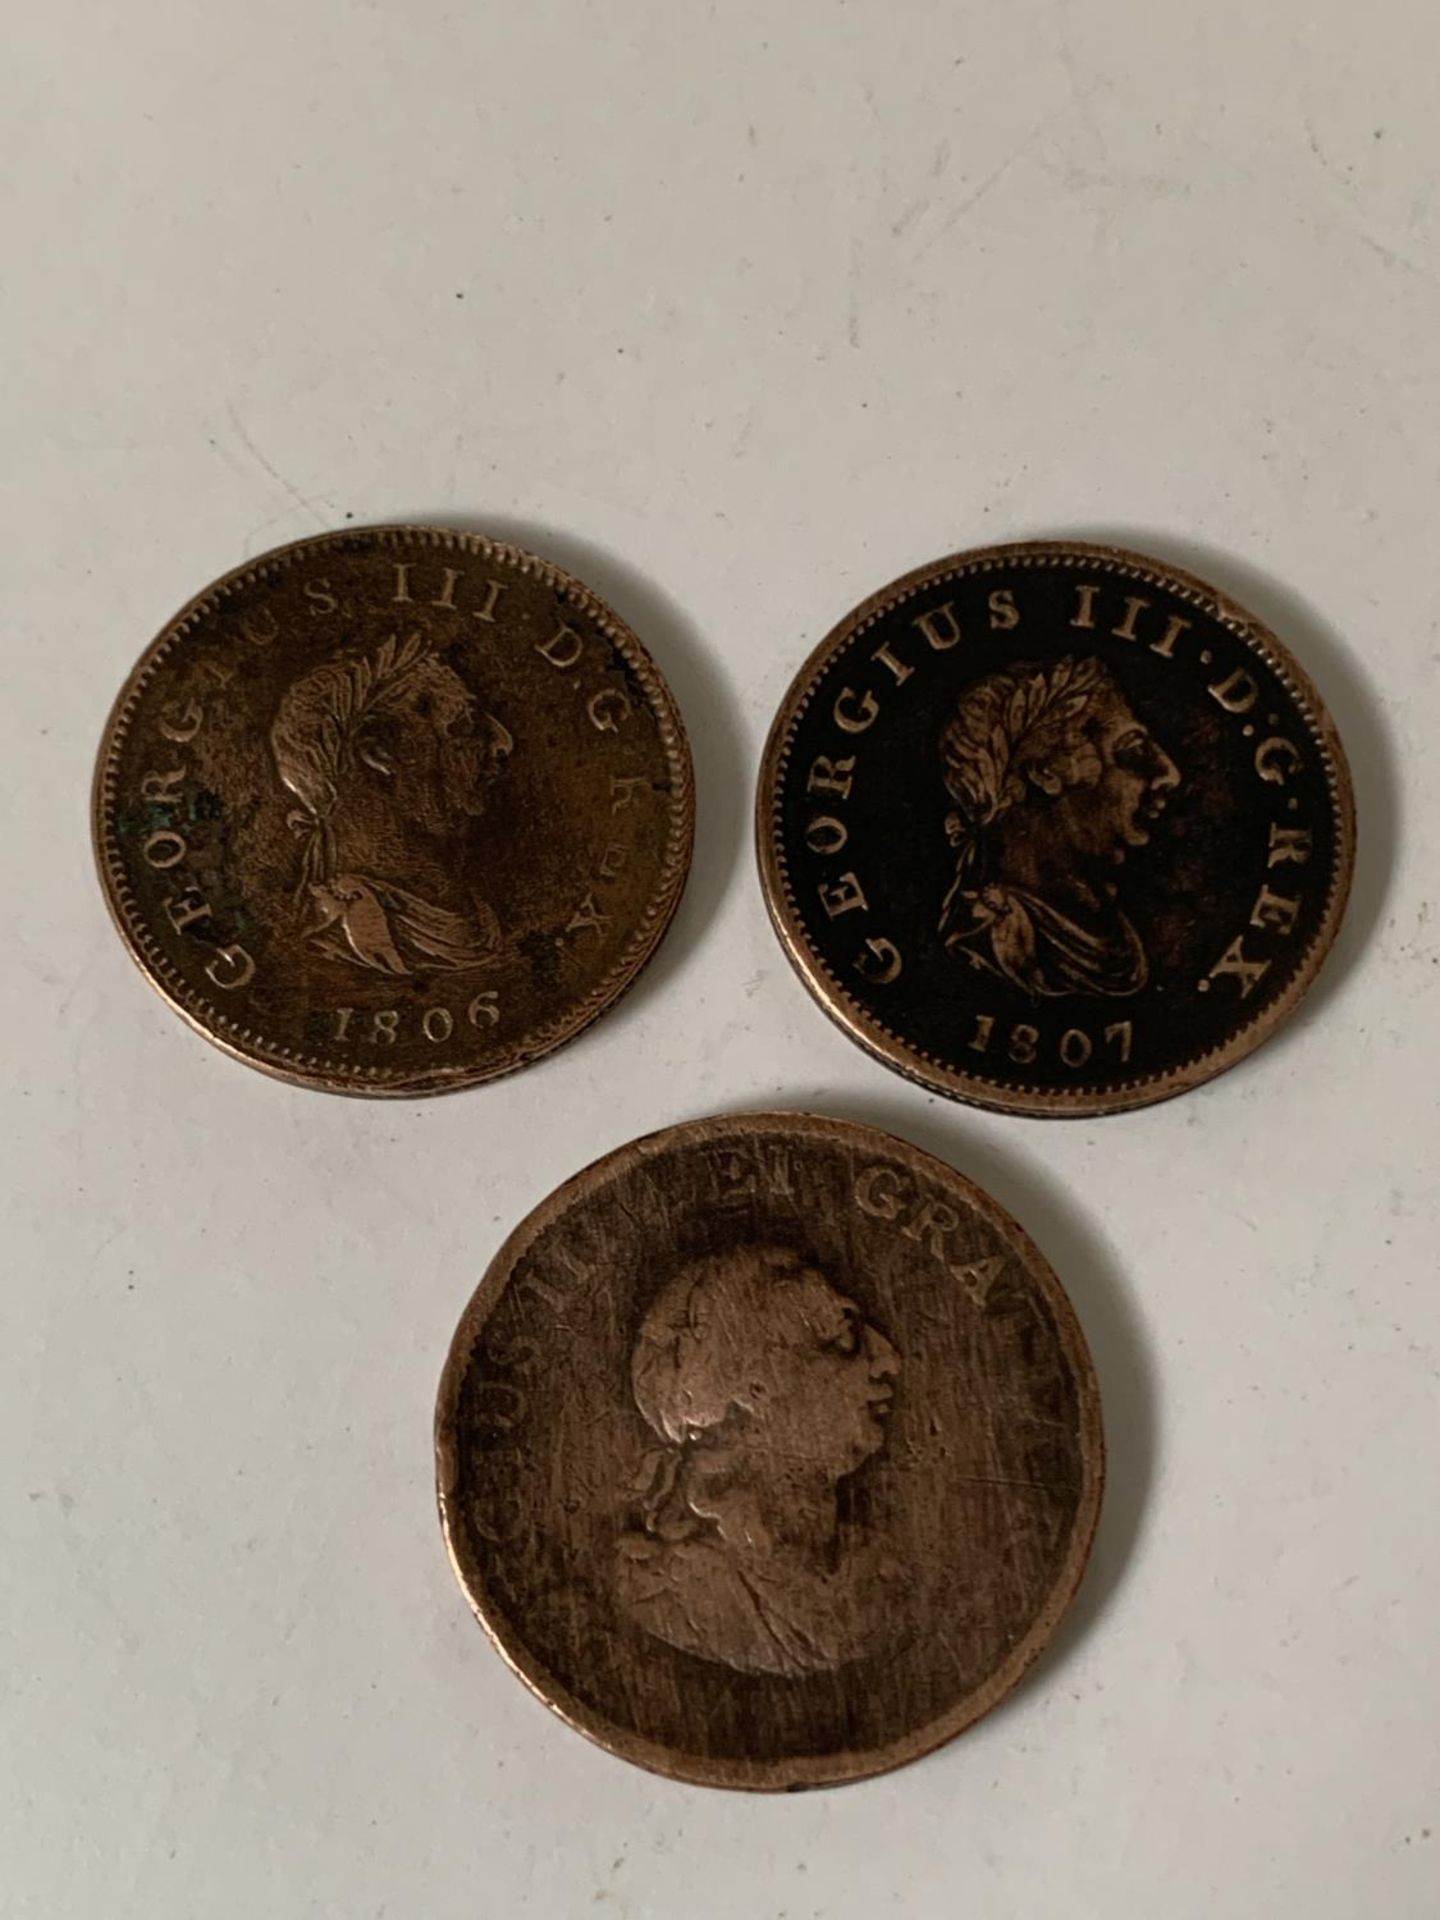 THREE GEORGE III HALFPENNY COINS - 1799, 1806 AND 1807 - Image 2 of 2